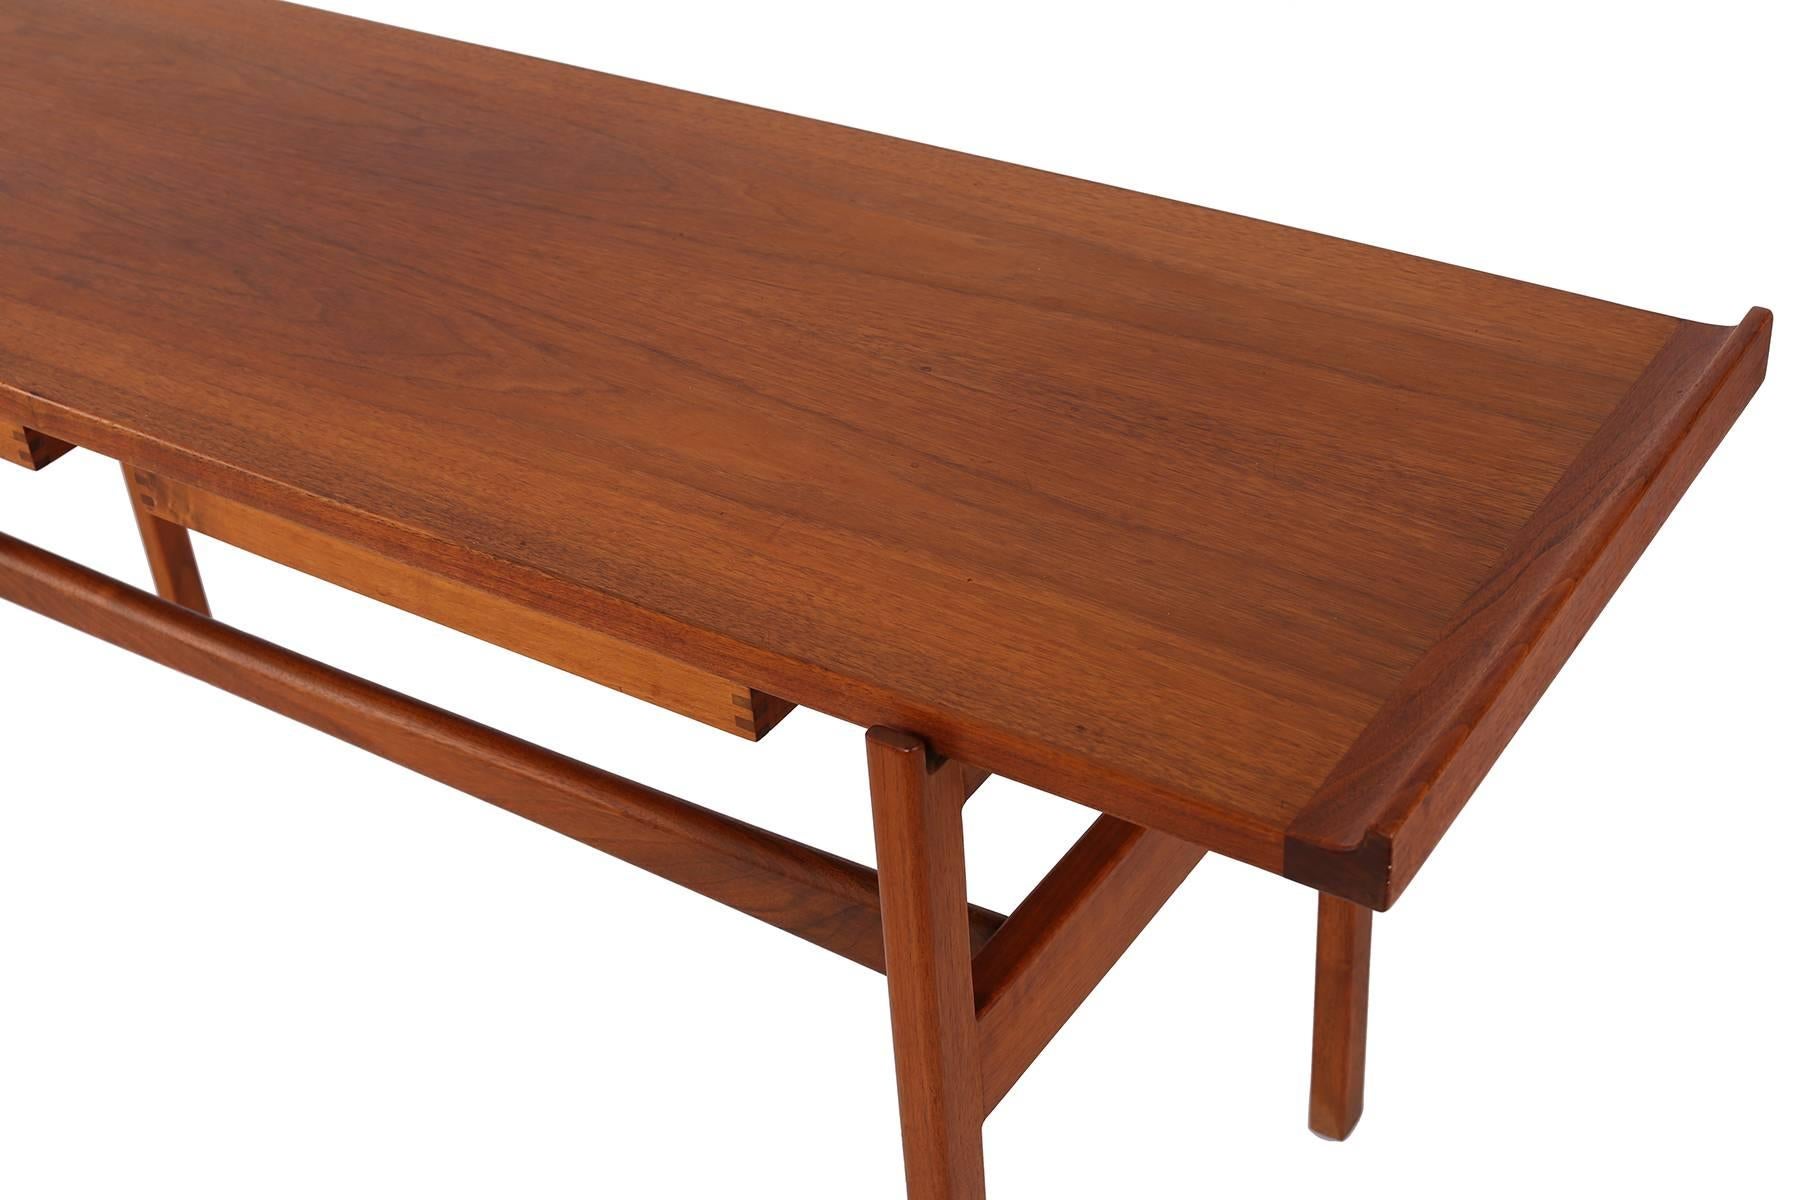 Early Jens Risom solid teak sofa or console table, circa early 1960s. This all original example has two drawers with exposed dove tailing and a floating inset top that rests inside the unusual solid teak legs. Finished on all sides.